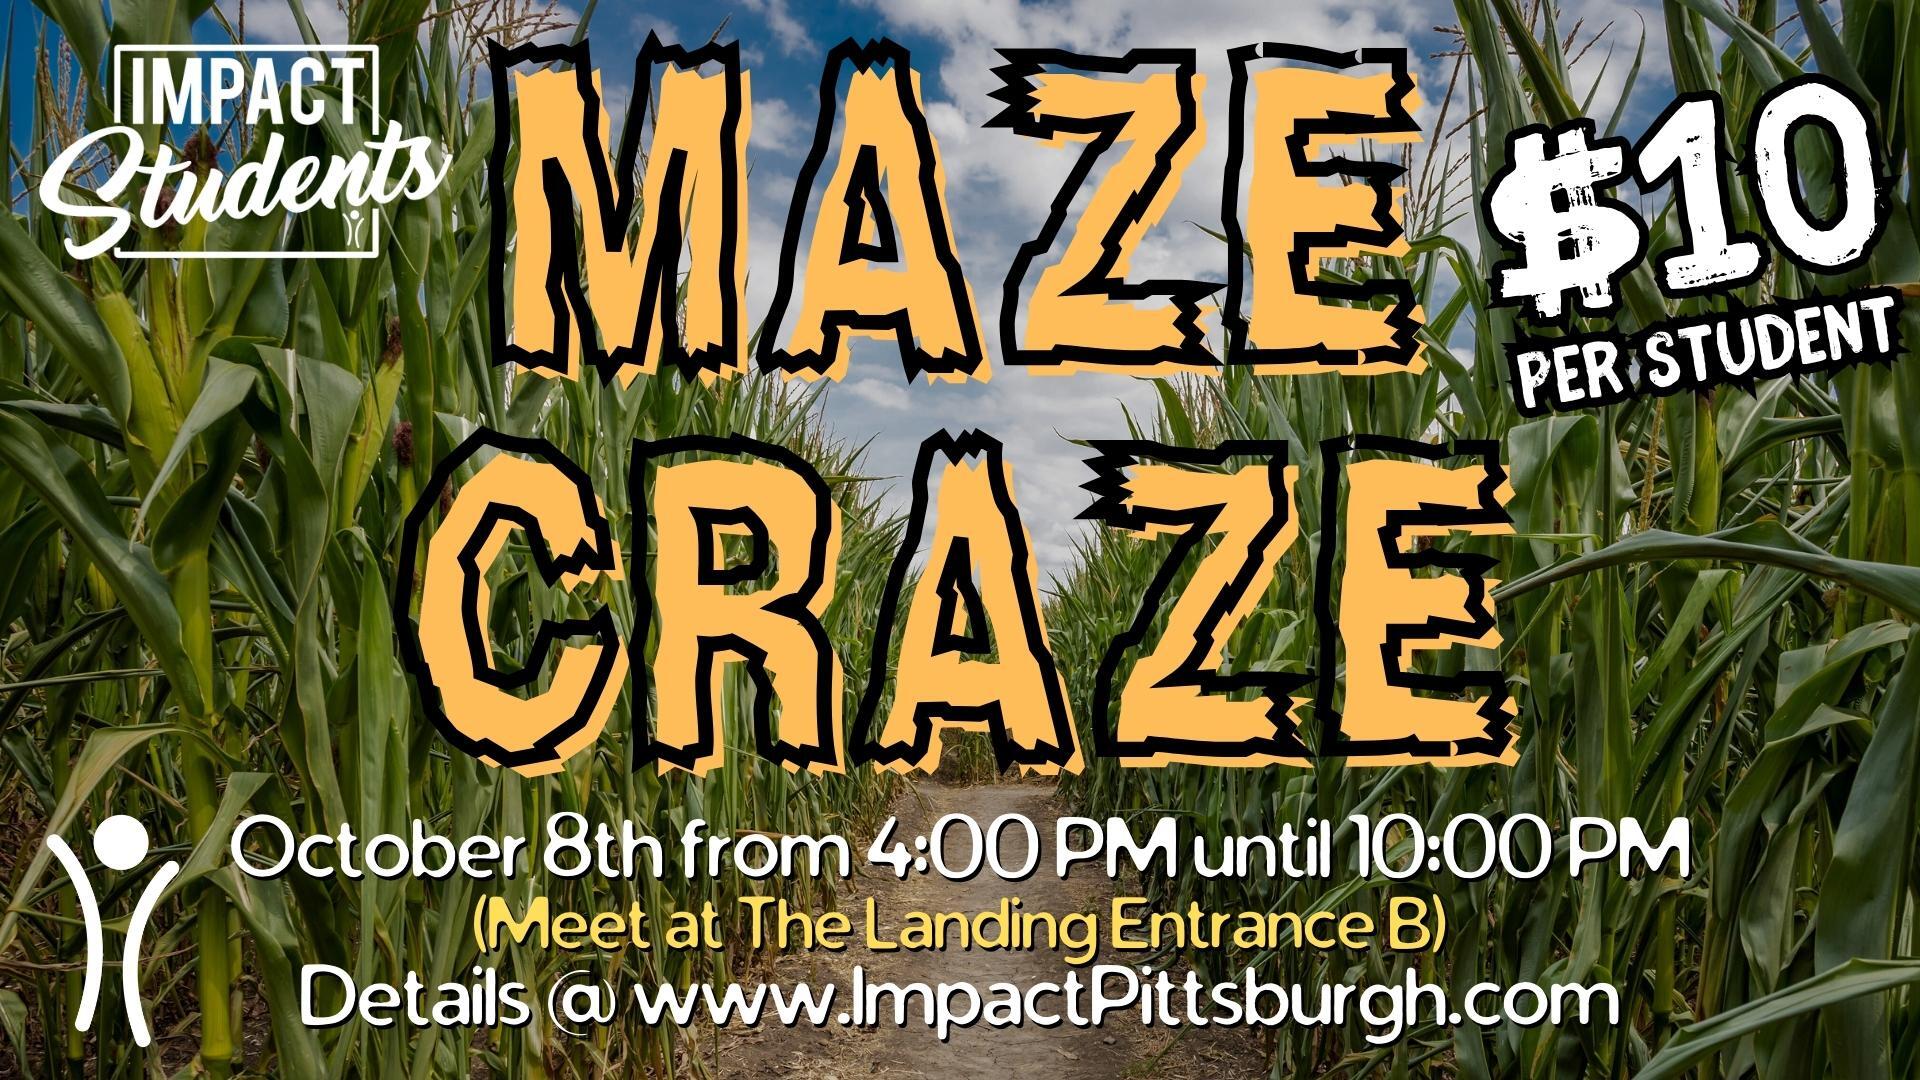 Featured image for Impact Students Maze Craze